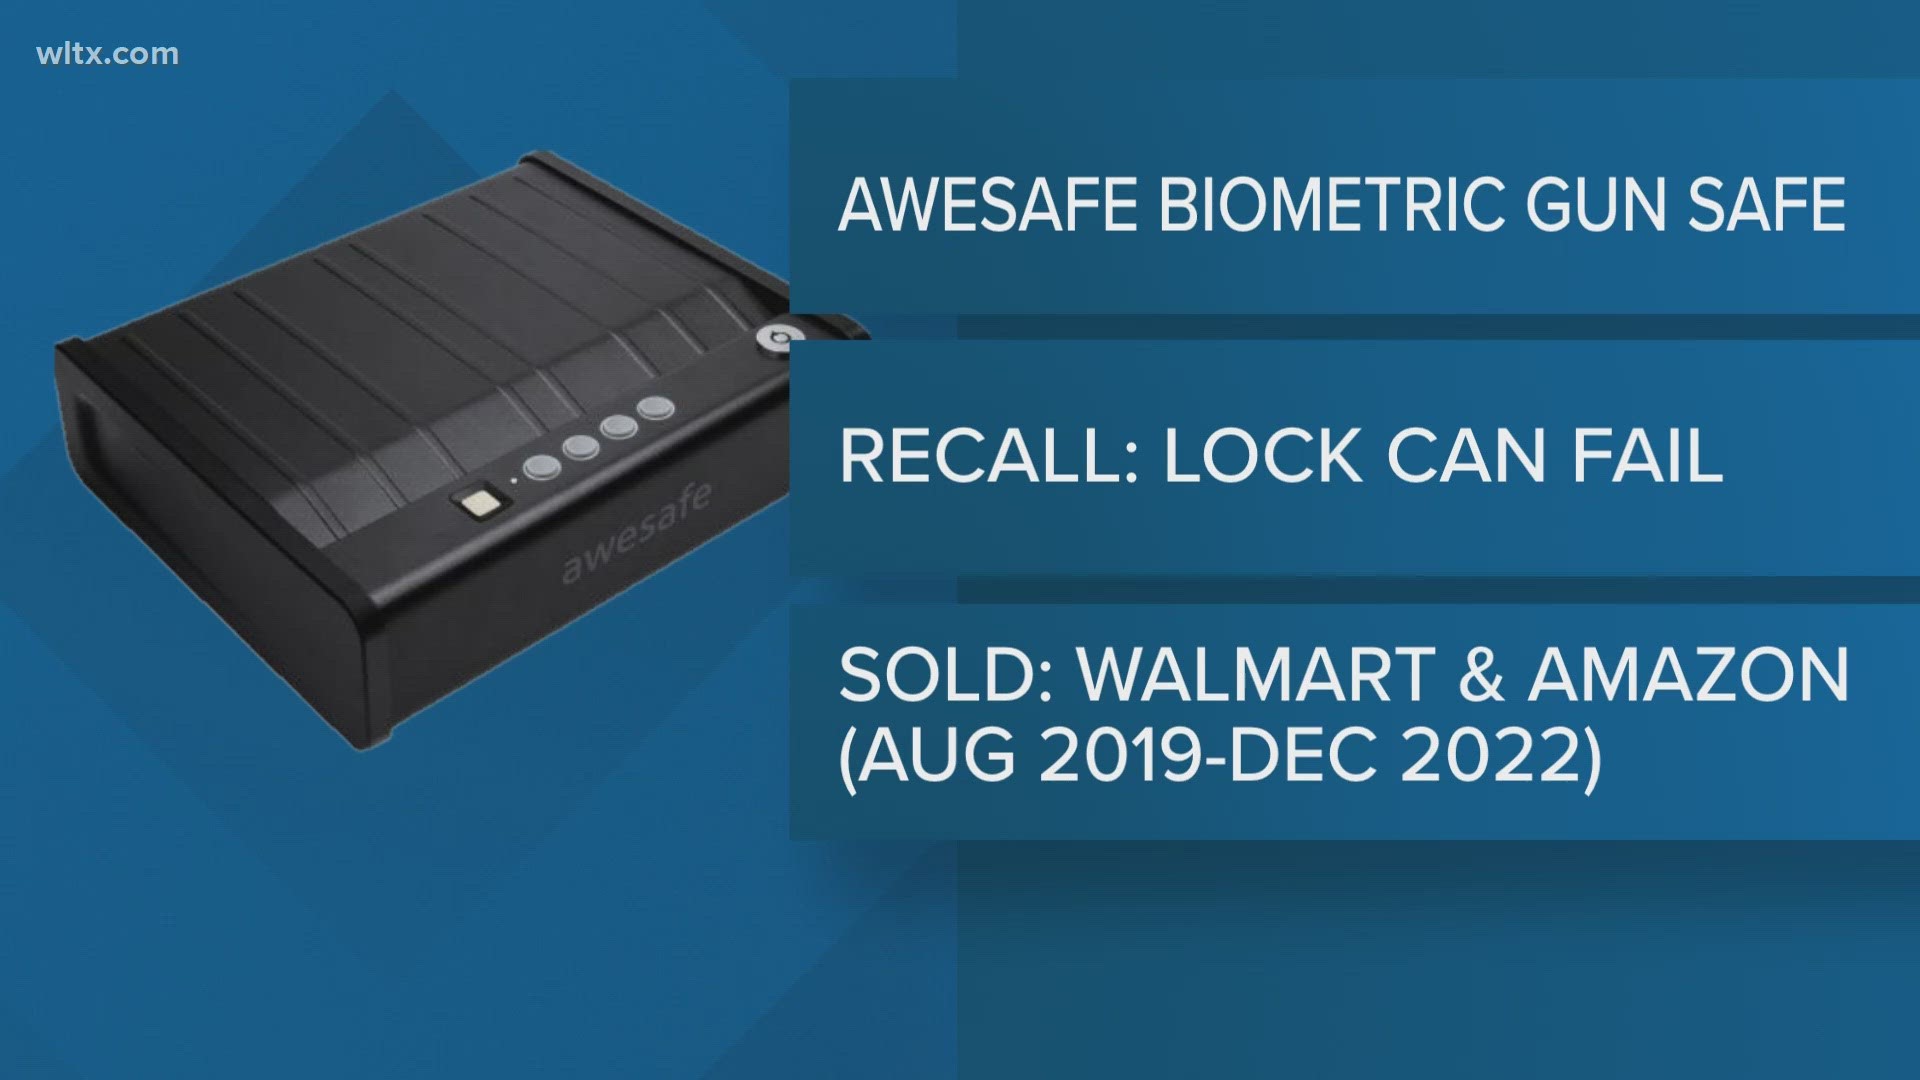 Awesafe us recalling biometric gun safes due to serious injury and risk of death.